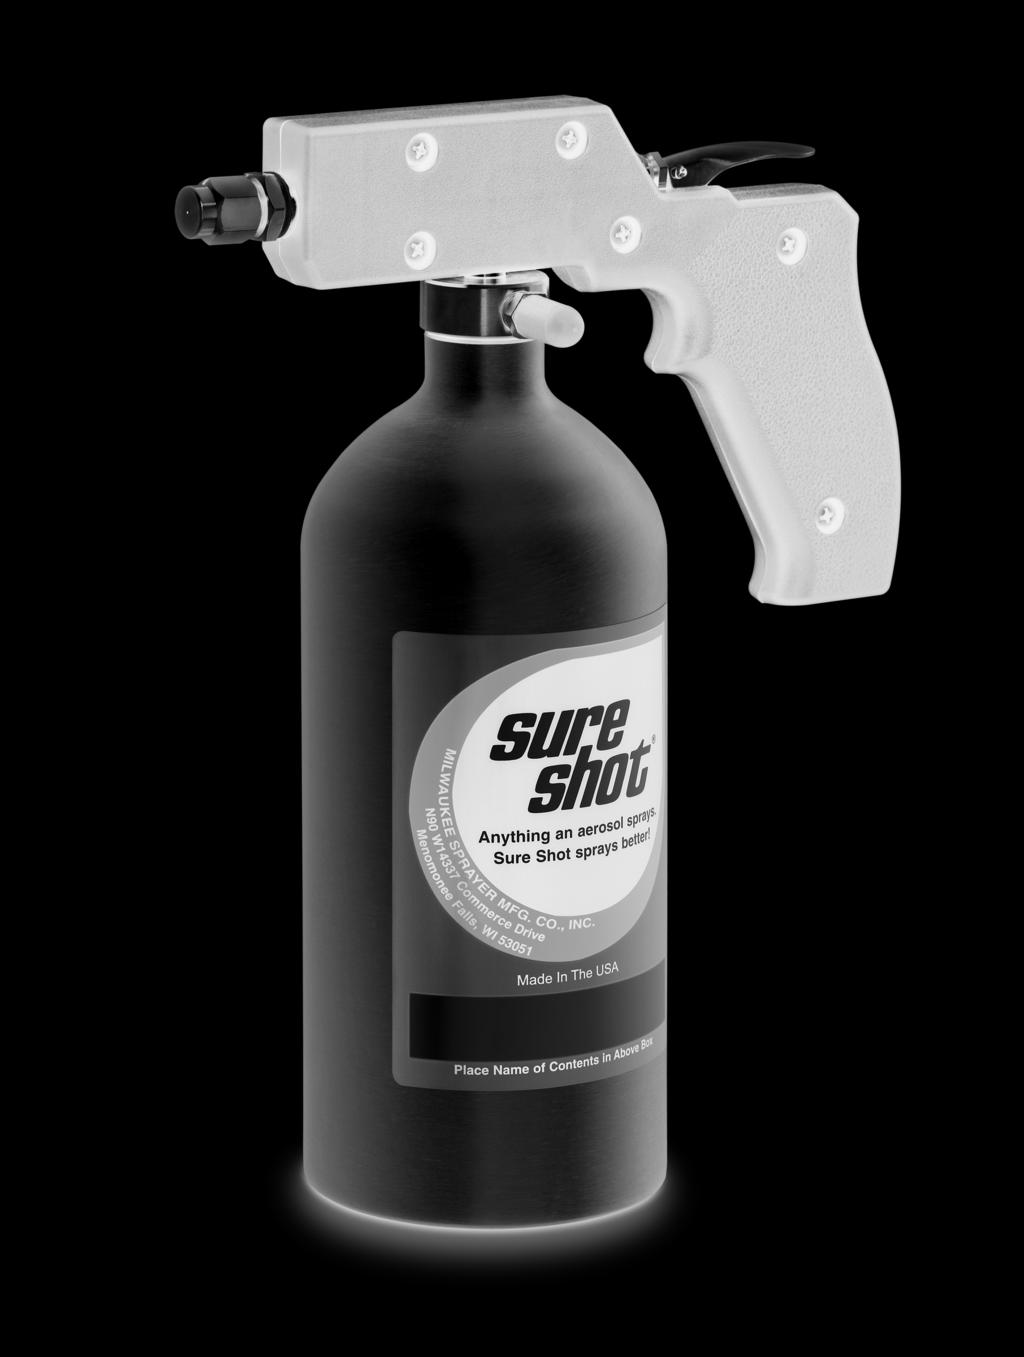 SURE SHOT SPRAYERS INSTRUCTIONS Refillable, reusable. Extra versatile. Pressurized by free air MODEL M 24 OZ.